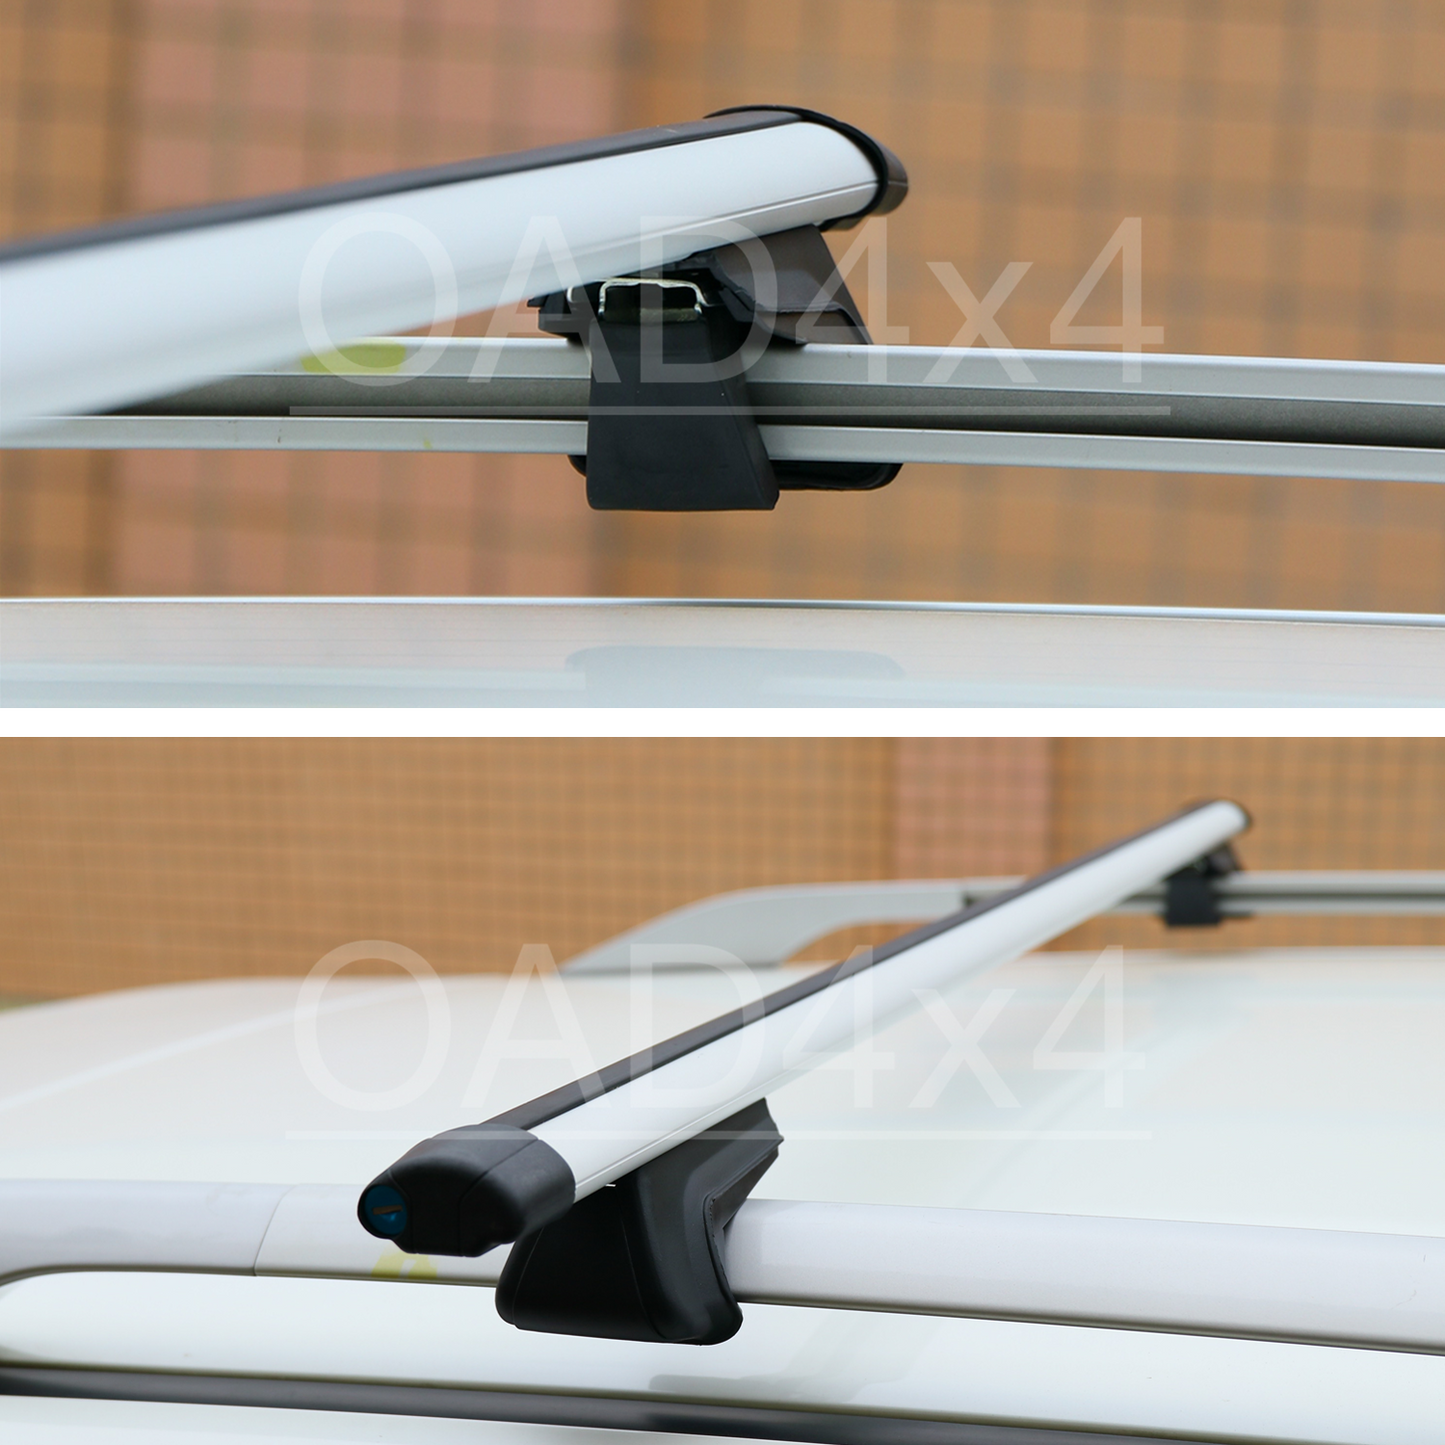 OAD 1 Pair Aluminum Silver Cross Bar Roof Racks Baggage holder for Mitsubishi Triton dual cab 06-15 with raised roof rail